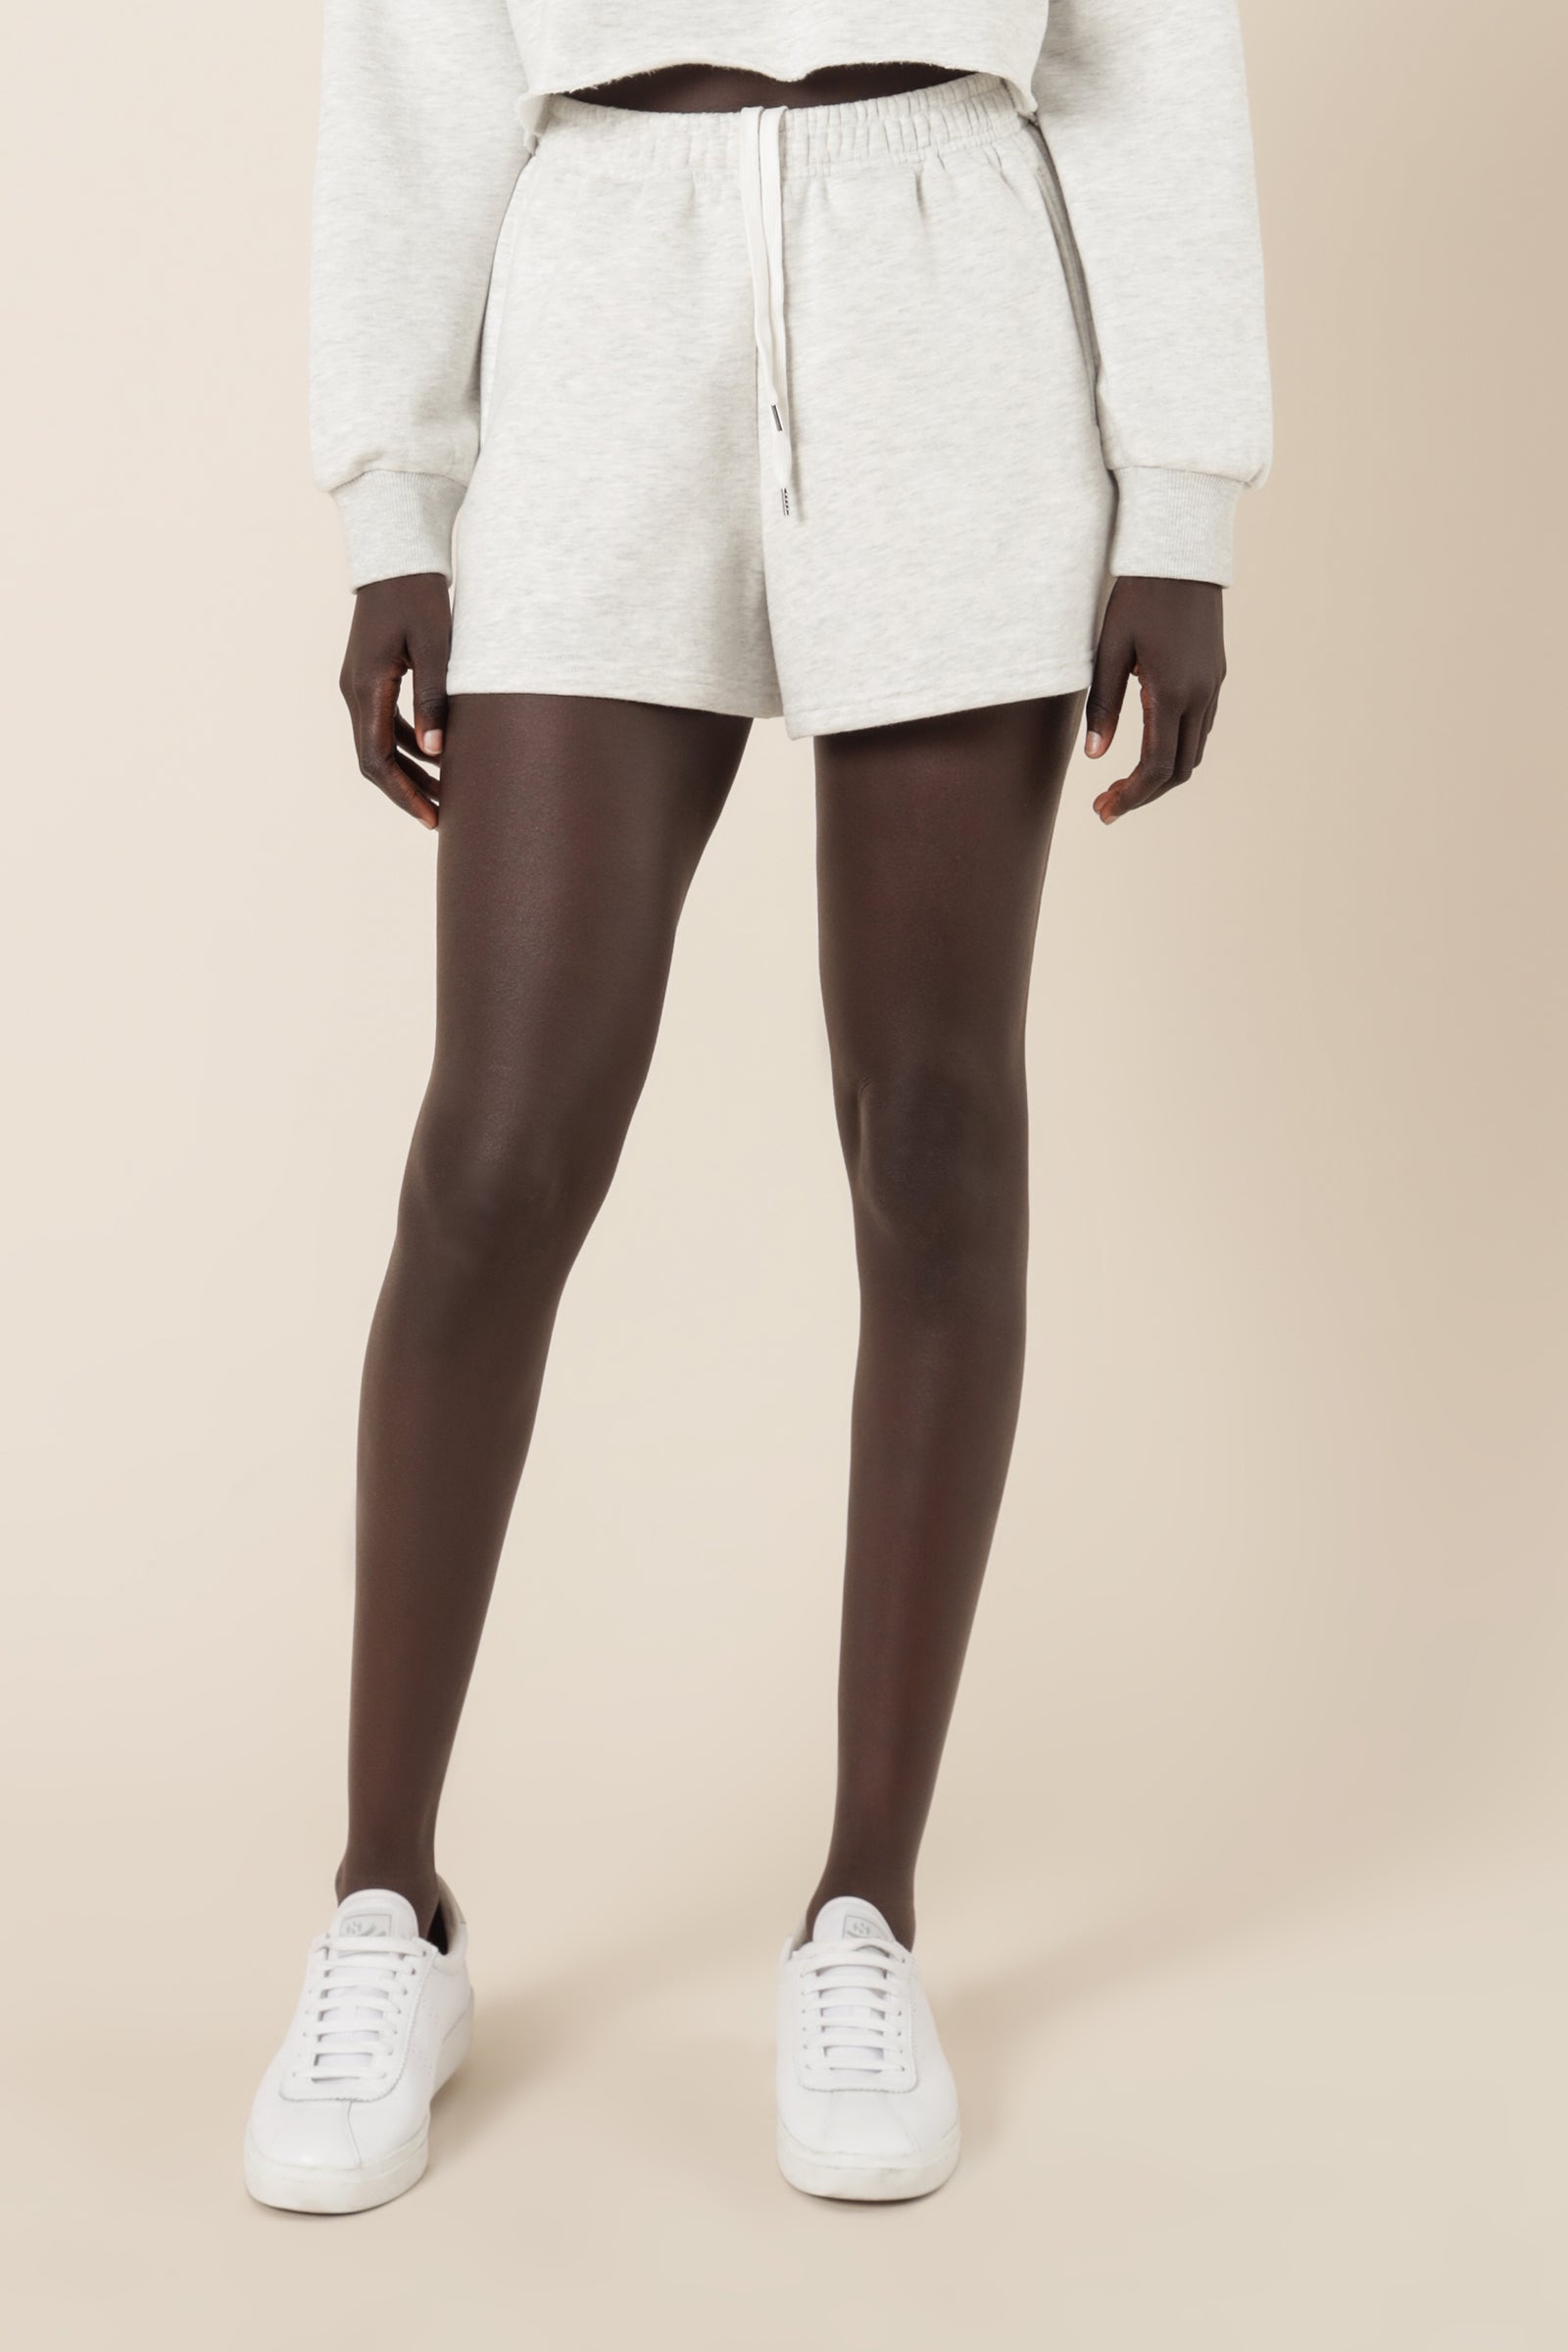 Nude Lucy carter classic short snow marle shorts